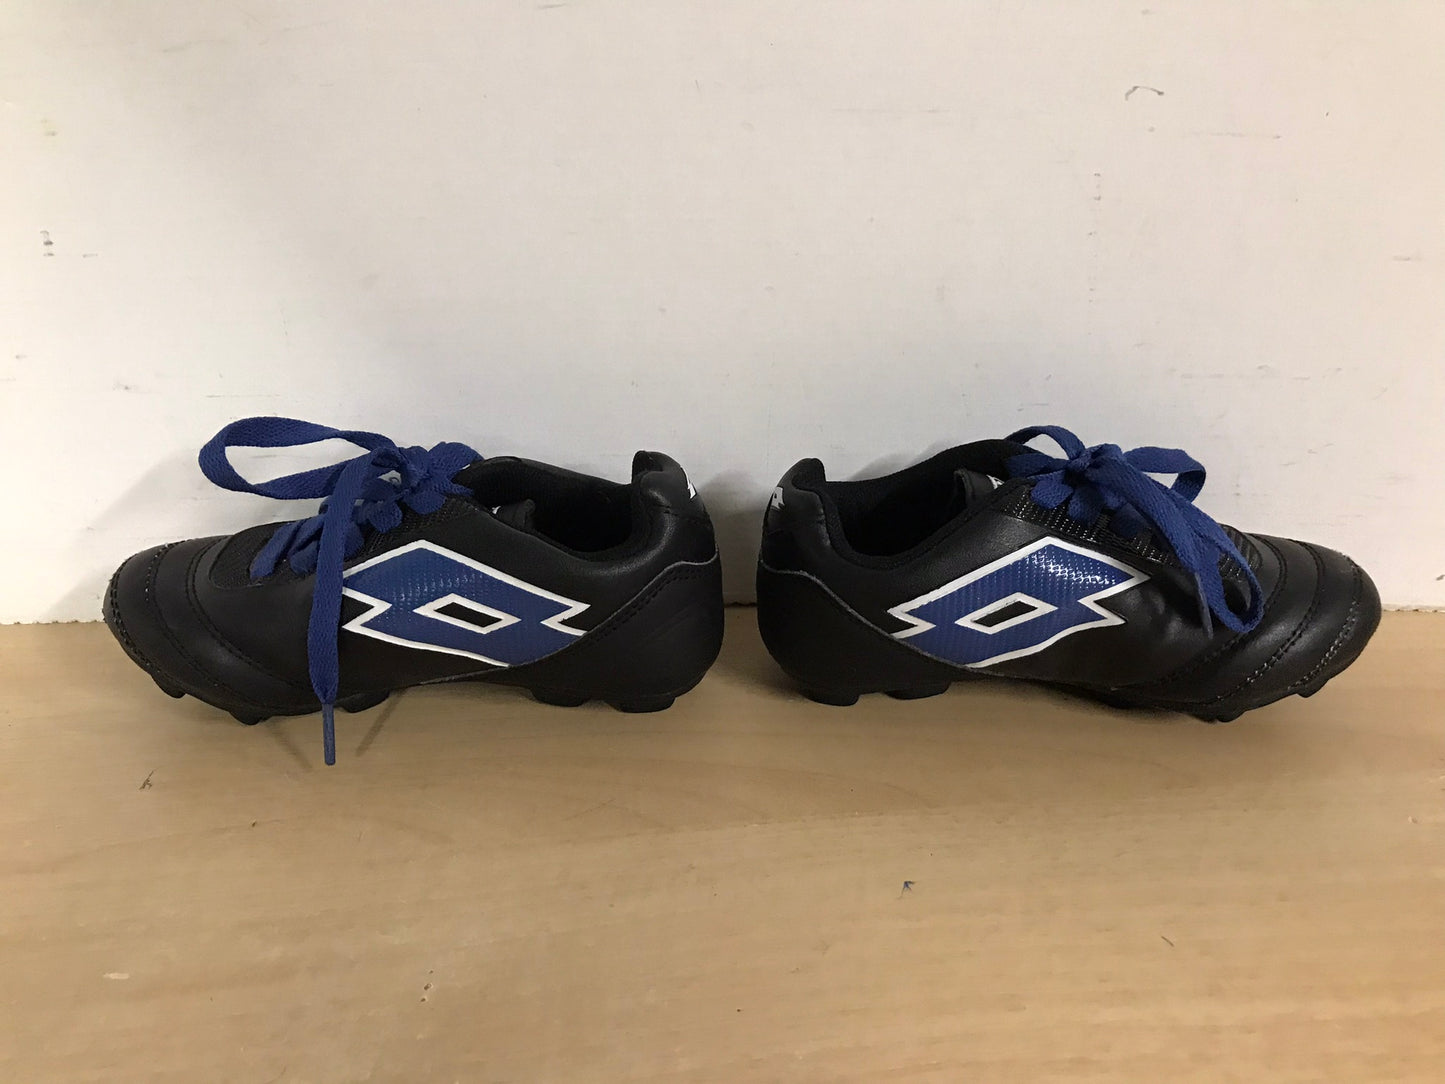 Soccer Shoes Cleats Child Size 10 Toddler Lotto Black Blue Excellent